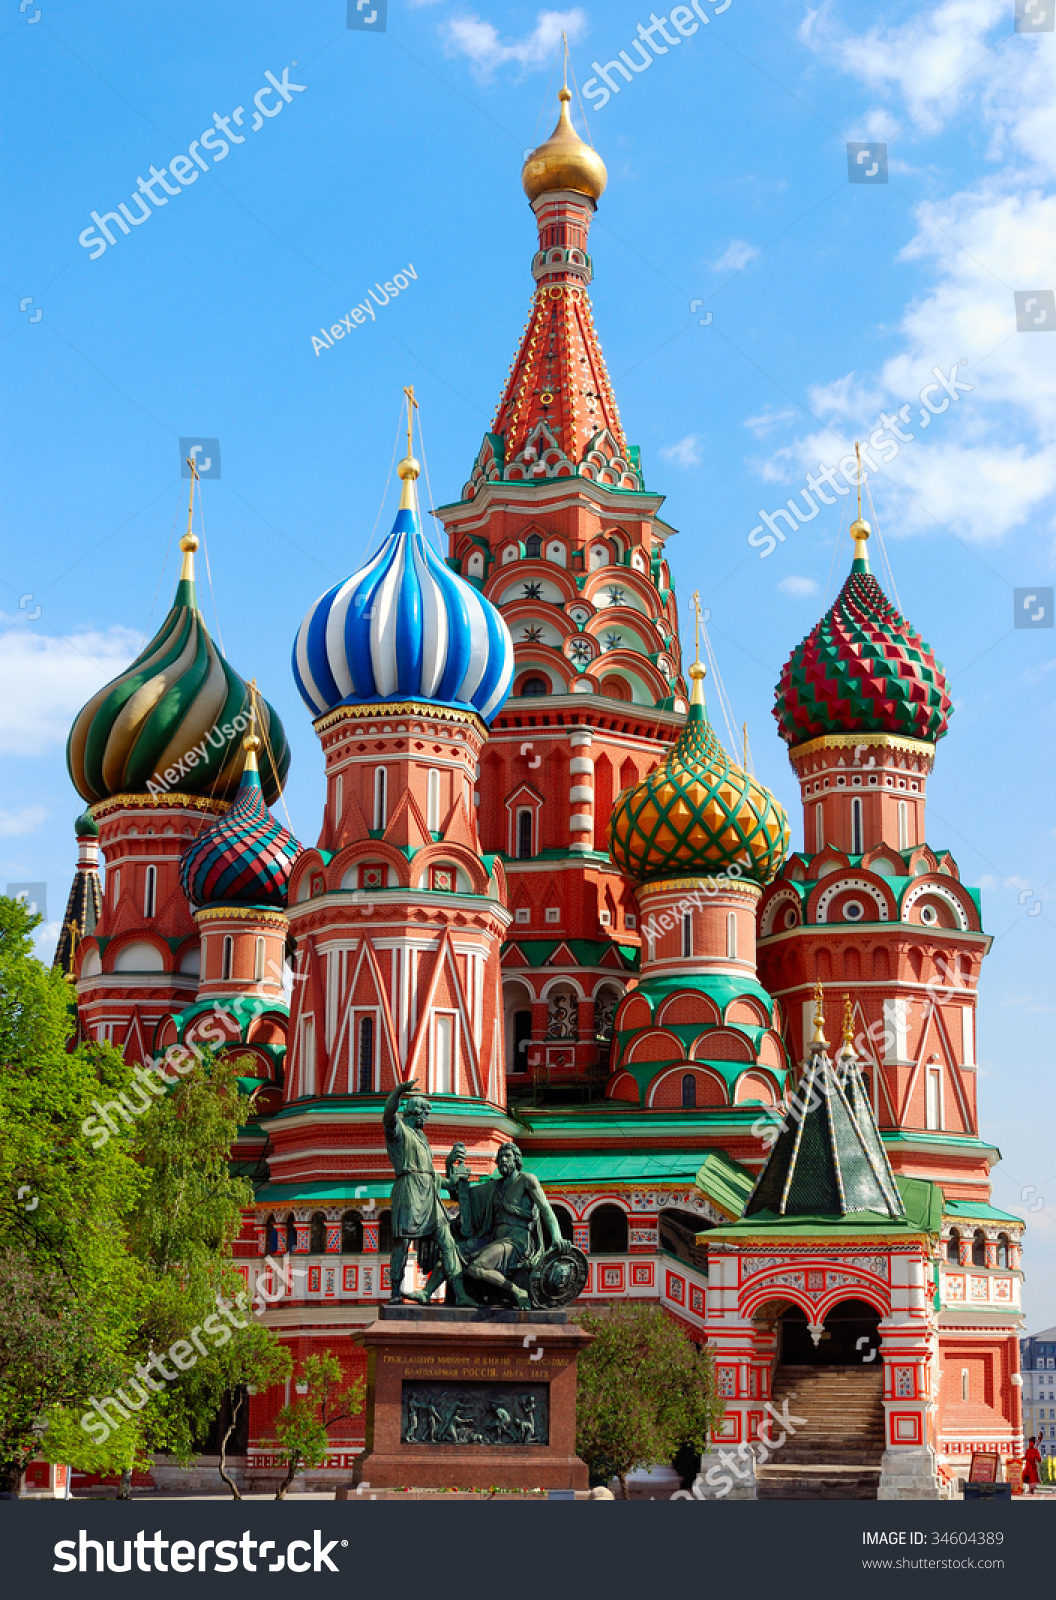 stock-photo-st-basil-s-cathedral-on-the-